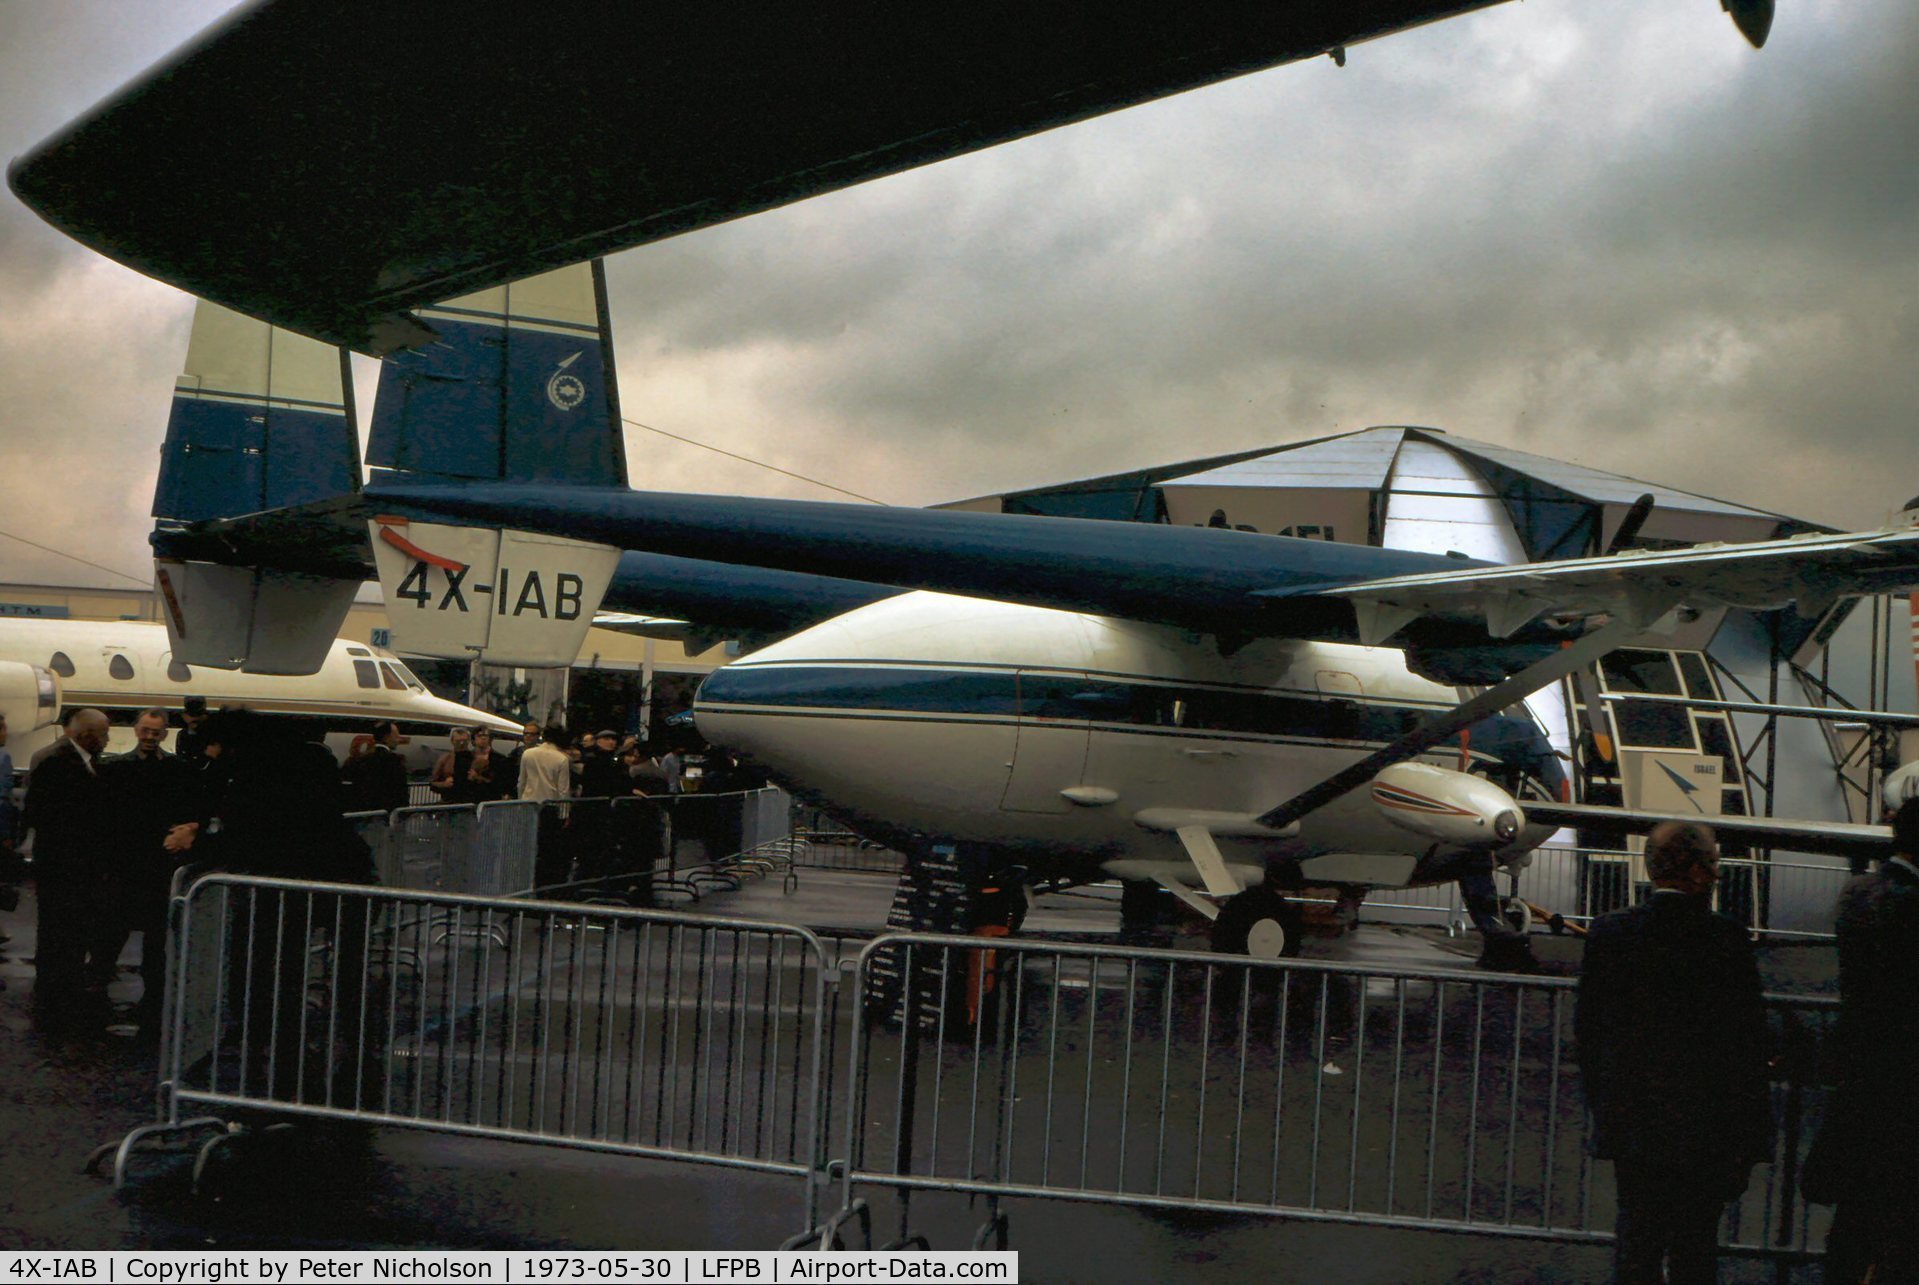 4X-IAB, 1972 Israel Aircraft Industries IAI-201 Arava C/N 0004, This military transport version of the Arava was on display at the 1973 Paris Airshow at Le Bourget.